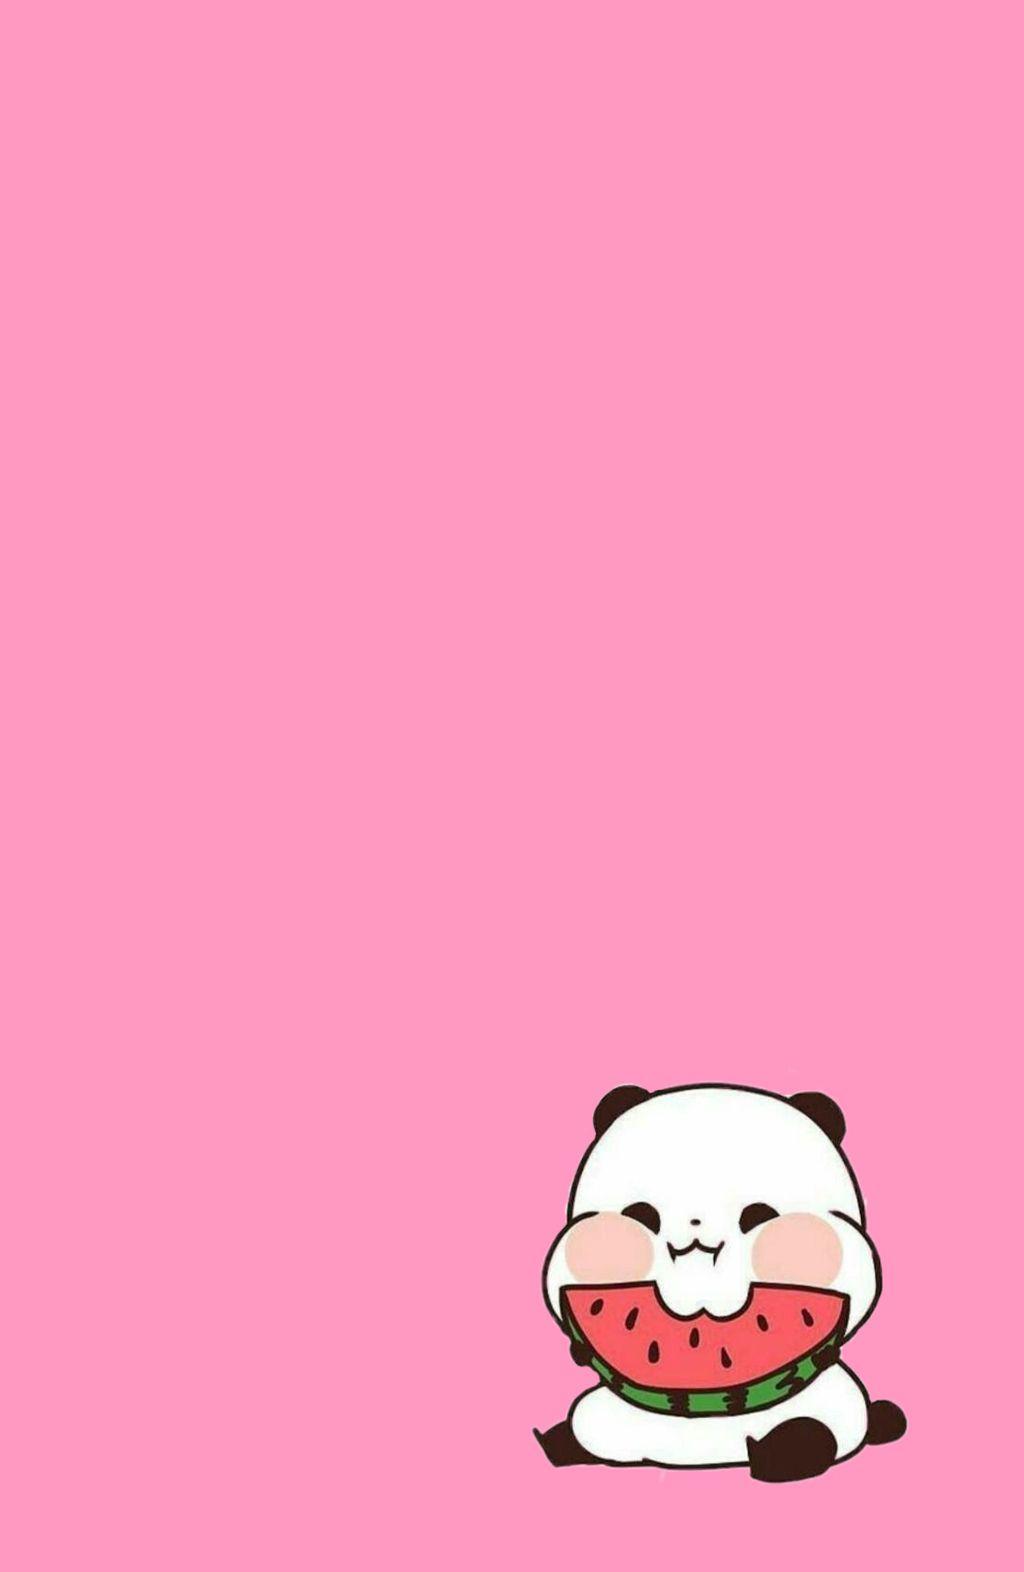 Cute Pink Aesthetic Wallpapers Free Download for Mobile